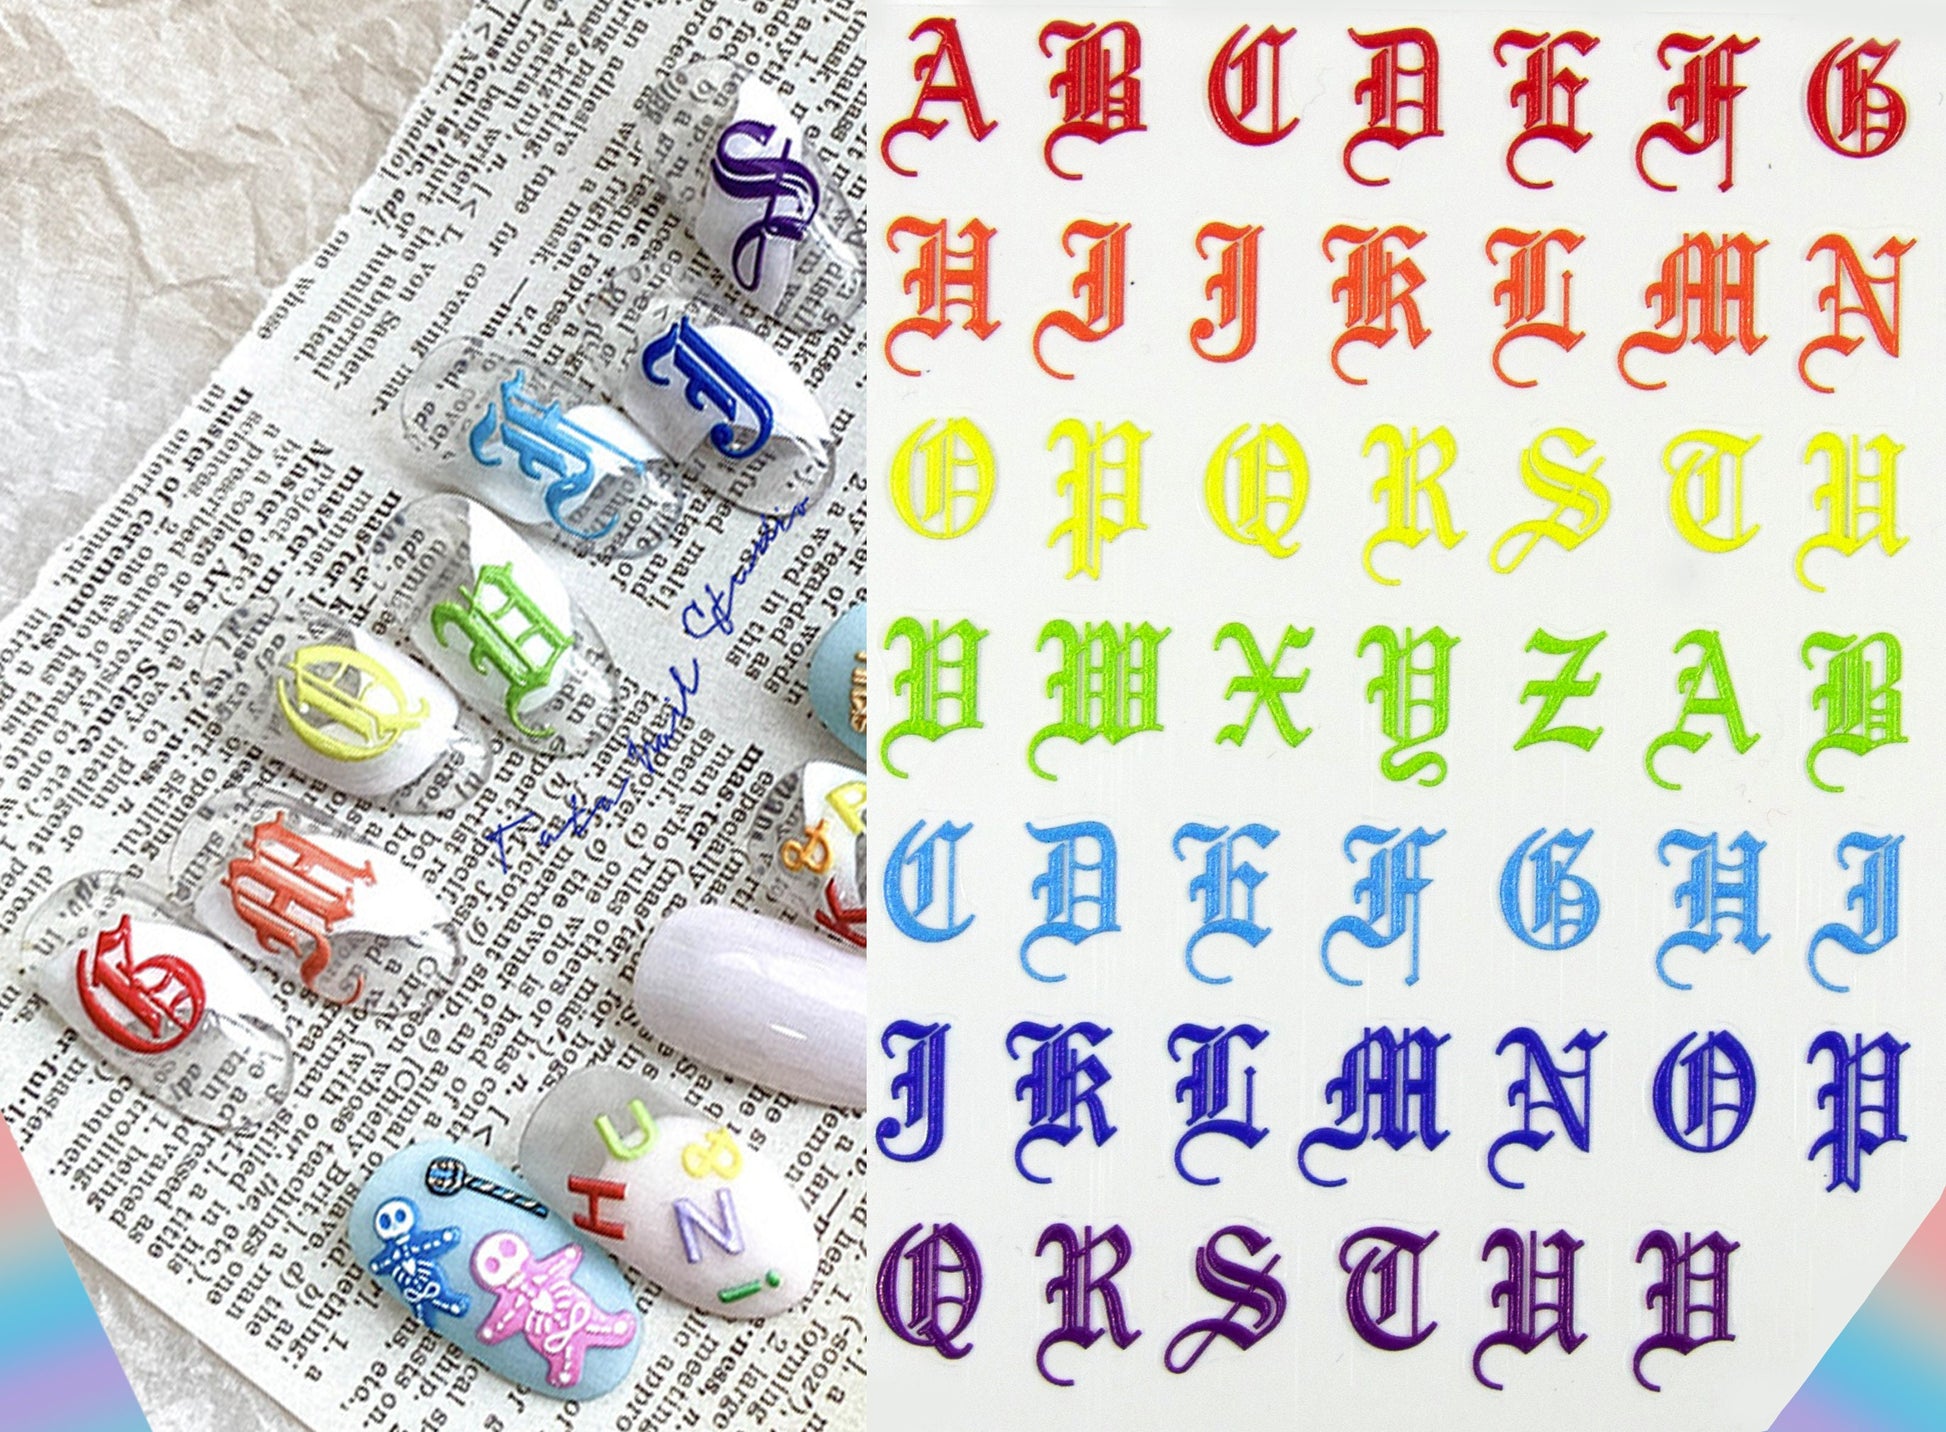 Gothic Script Colorful Nail Art Stickers Decals/ 3D Embossed Gothic minuscule Hand Writing holographic Retro Letters Alphabet Letters